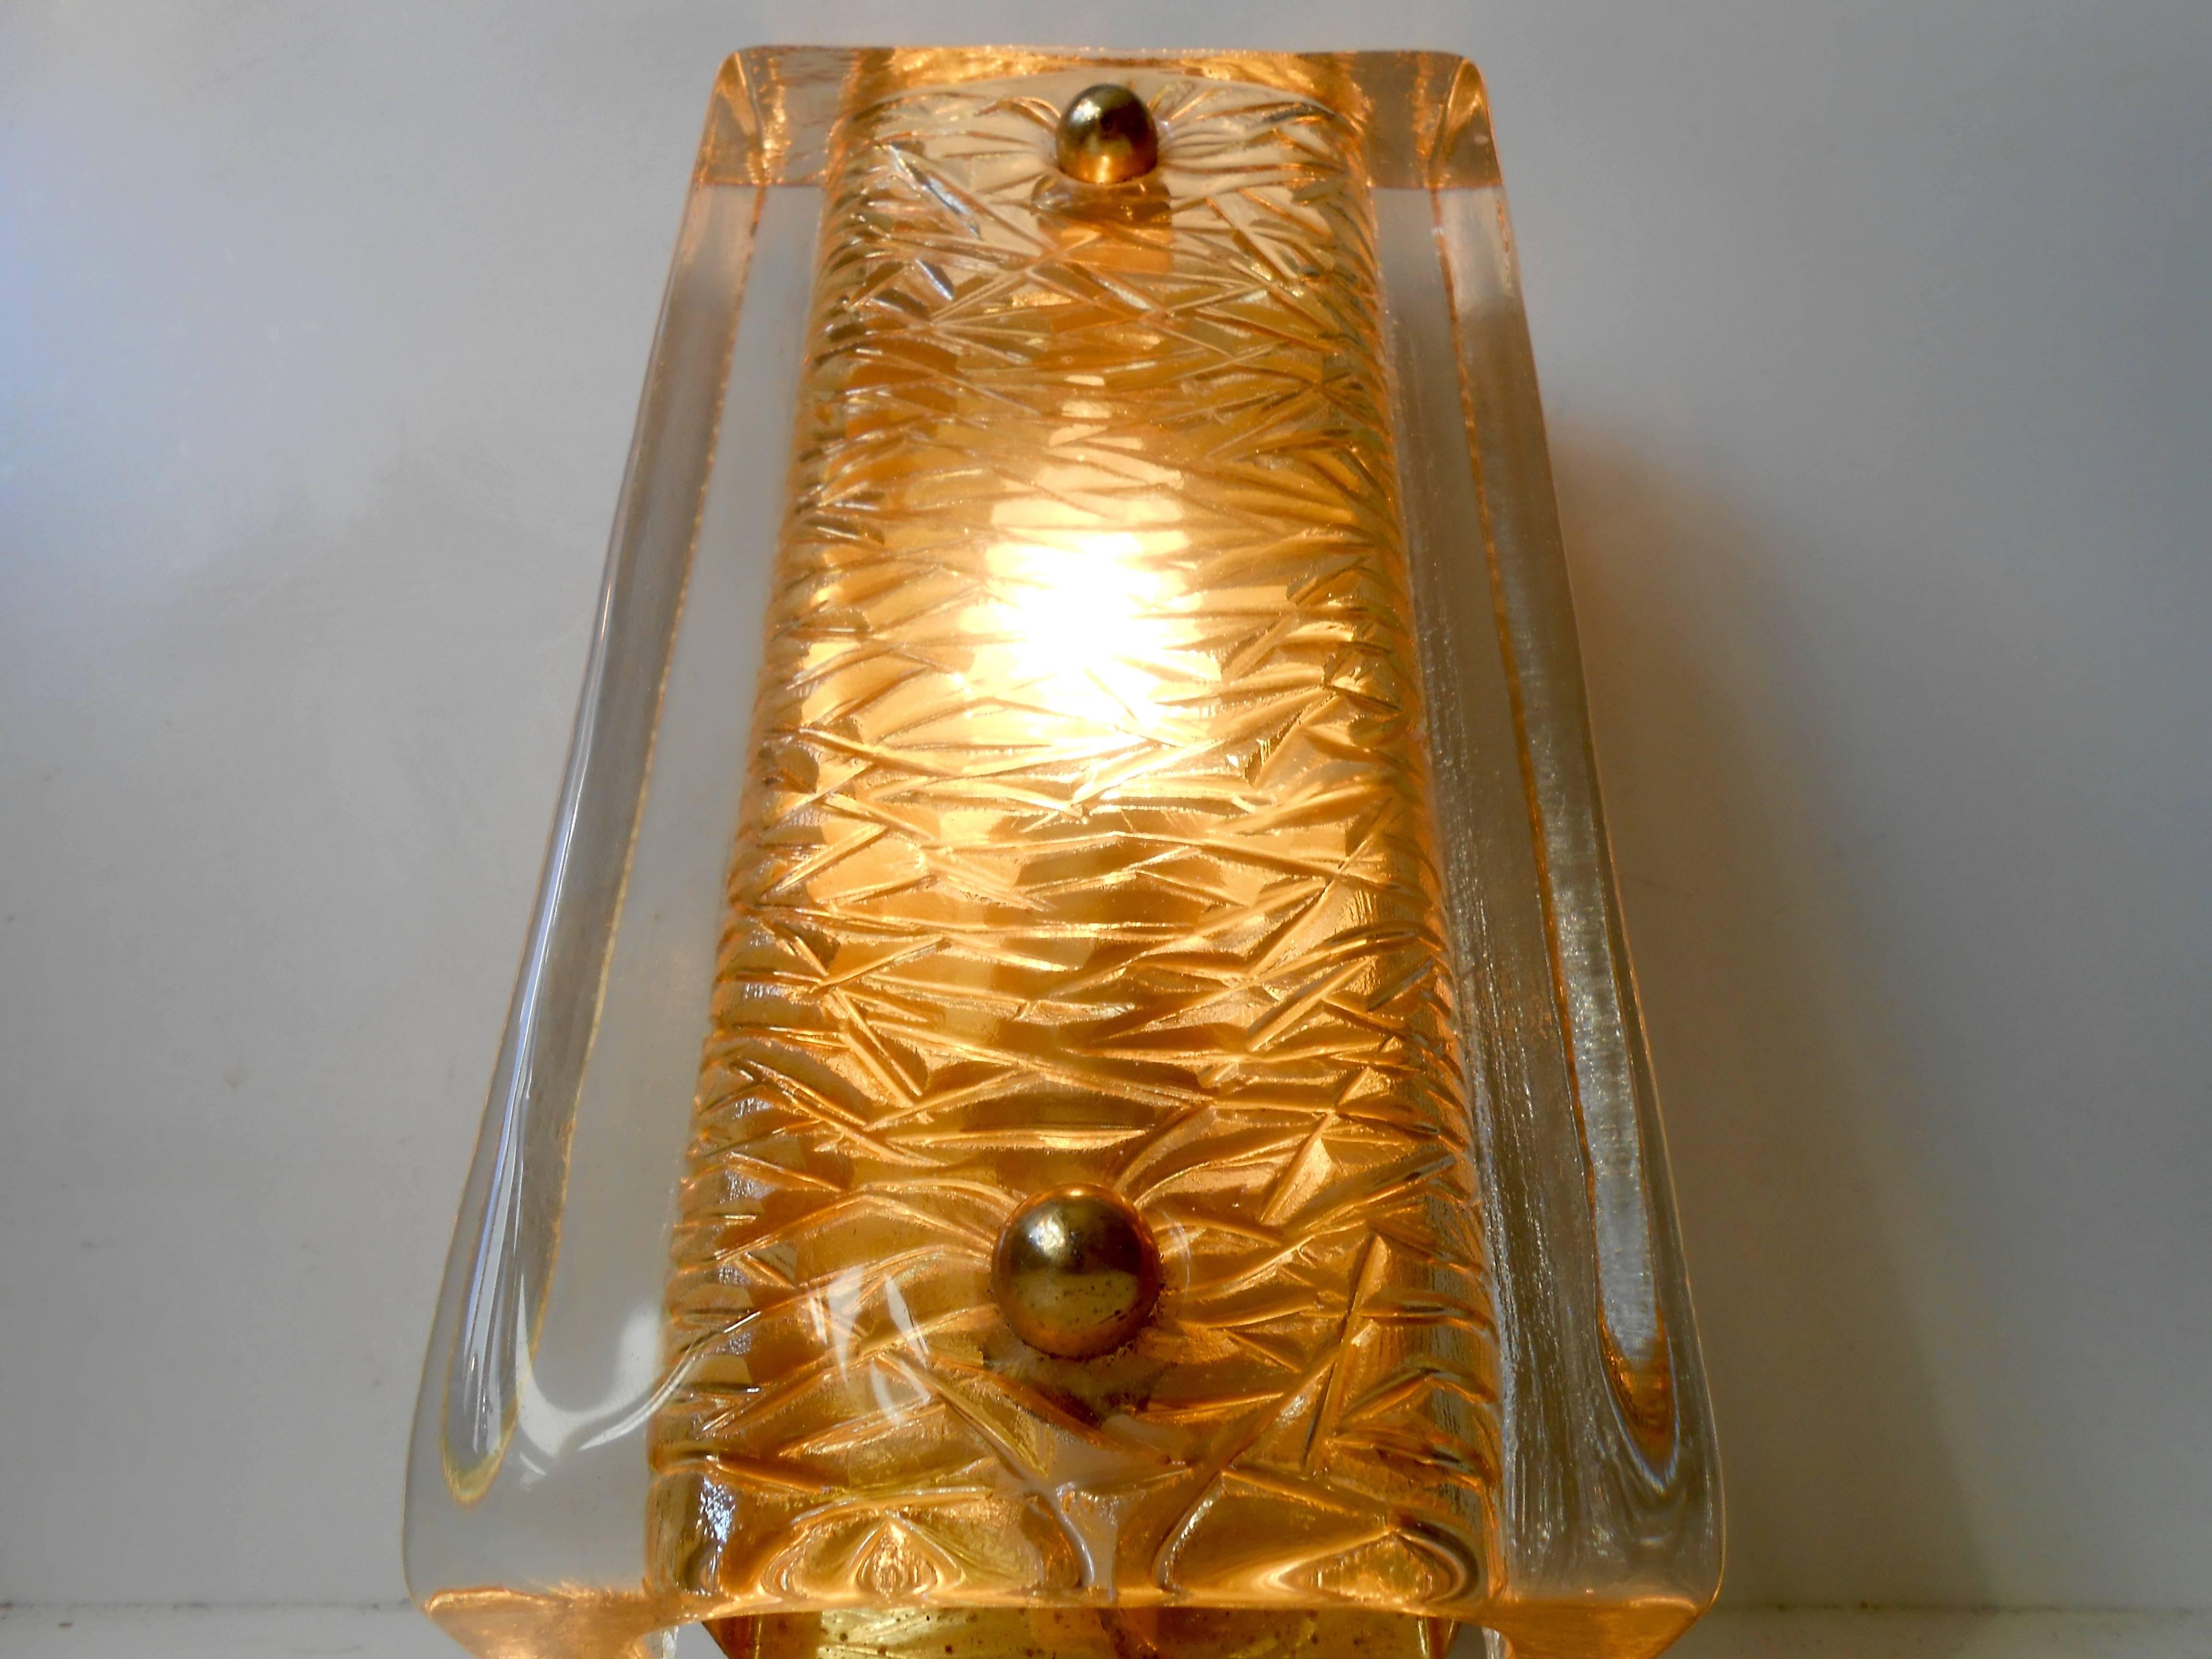 Orrefors crystal wall sconce with encapsulated gold dust by Carl Fagerlund. Measurements: H 9.5 inches (22 cm), W 4.5 inches (11.5 cm), D 4 inches (10 cm). Condition: Mint.